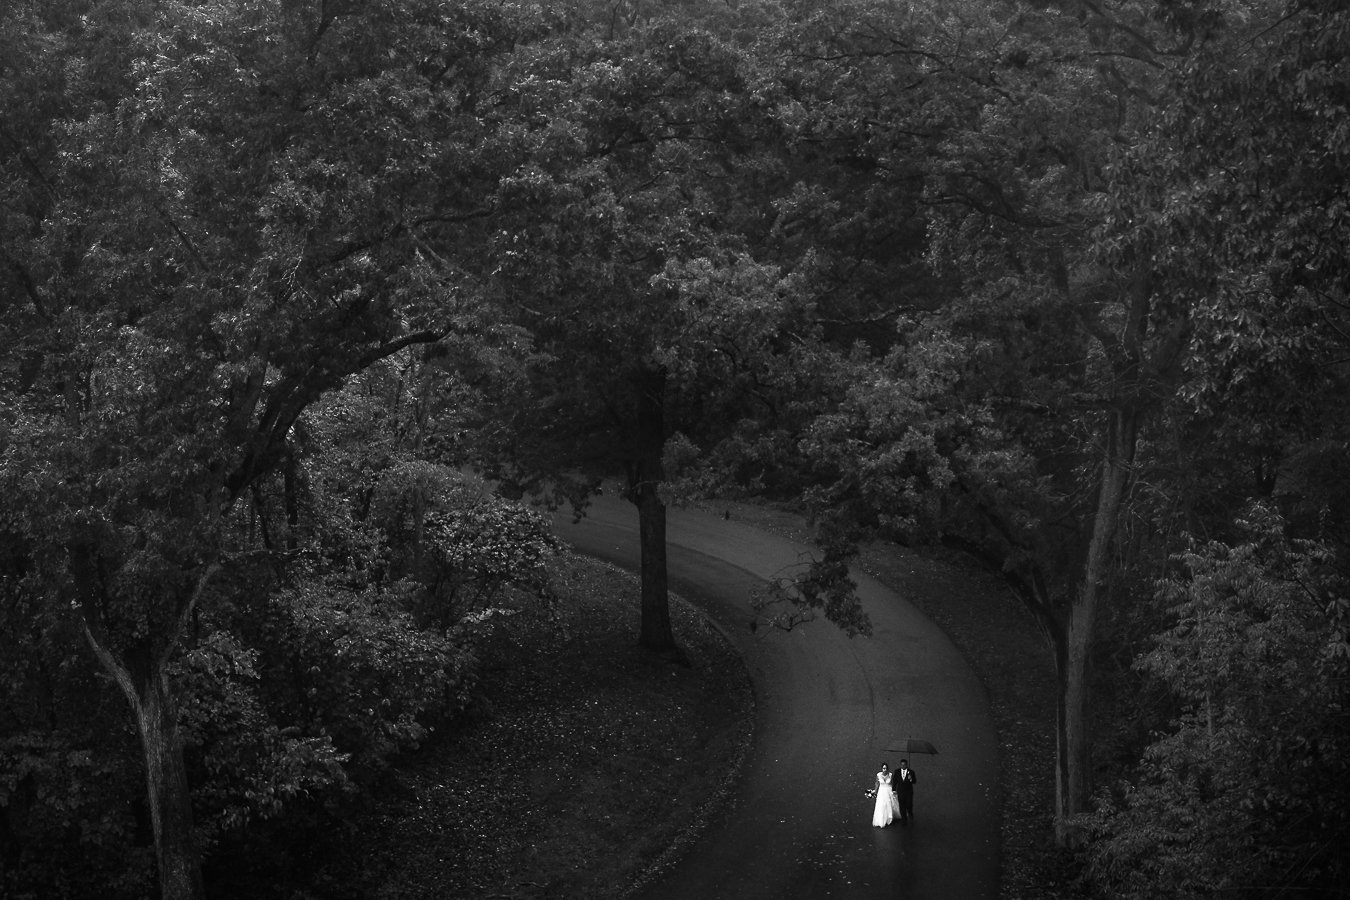 Gettysburg Wedding Photographer, lisa rhinehart, captures this black and white aerial image of the bride and groom as they walk down the pathway between the trees at the Gettysburg battlefields in pa during their rainy day wedding ceremony 